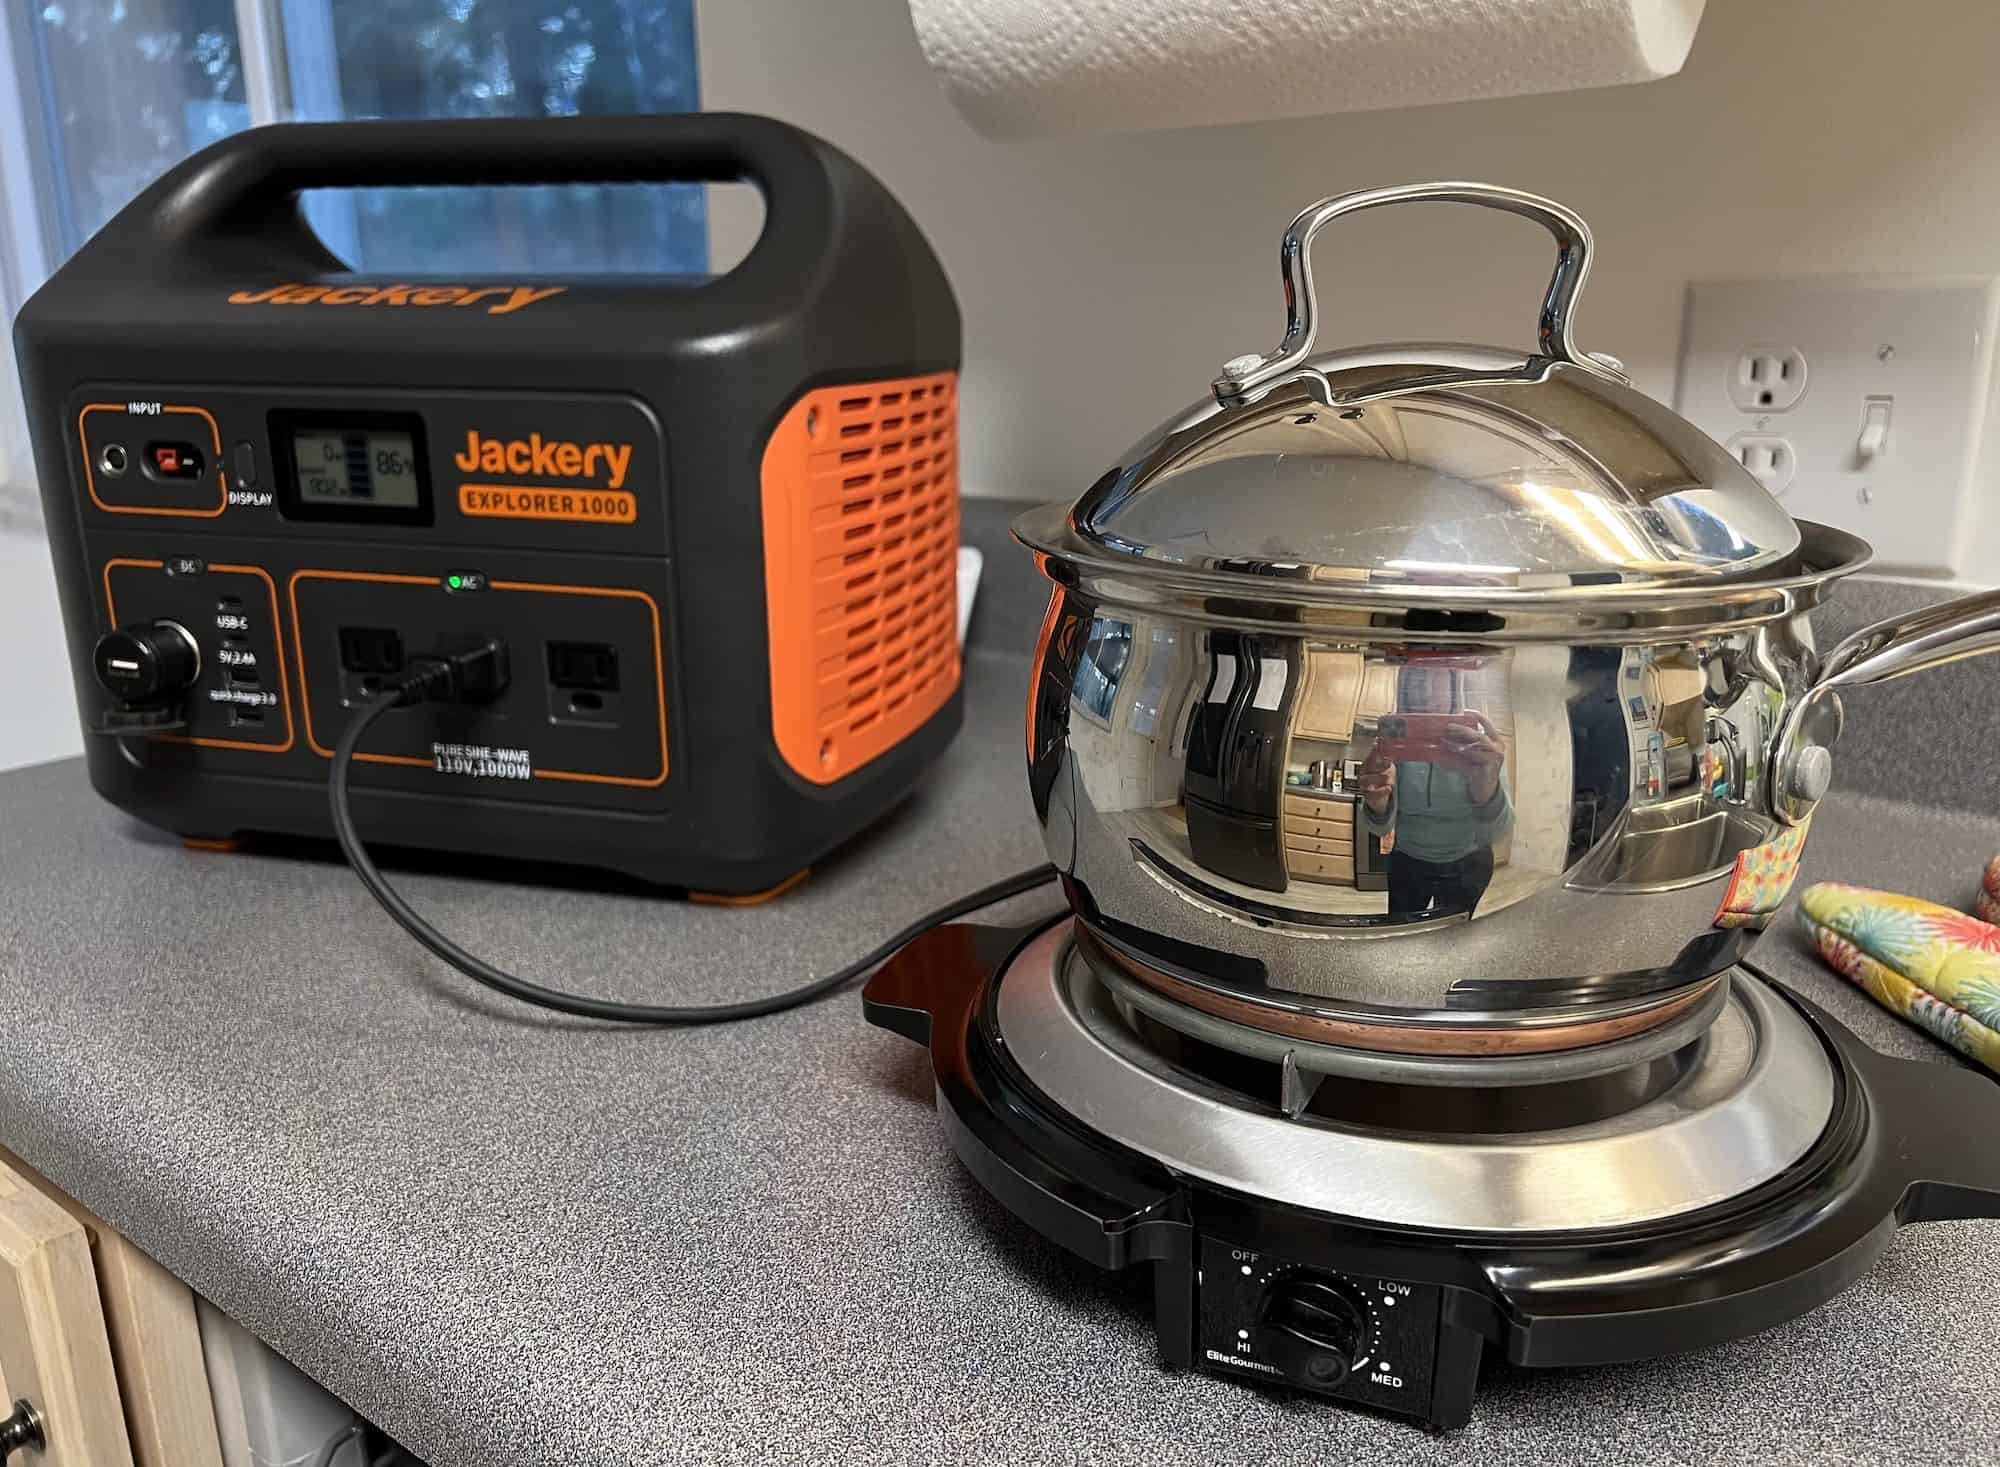 Jackery and Electric Hot Pot Cooker (Did not go well) 